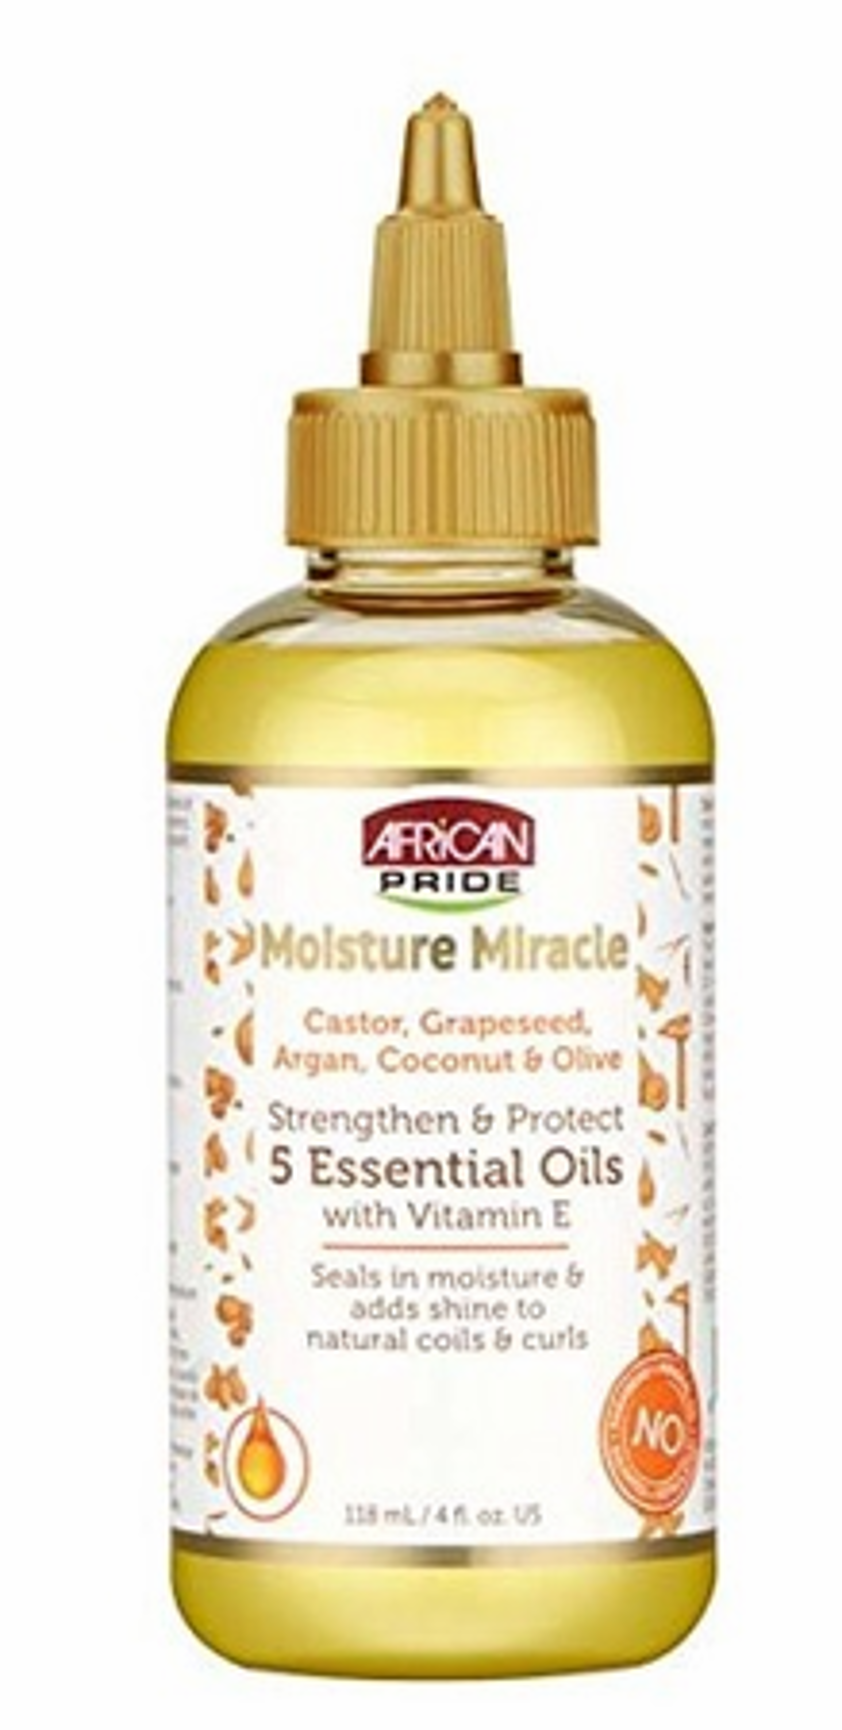 Moisture Miracle Strengthen & Protect 5 Essential Oils with Vitamin E